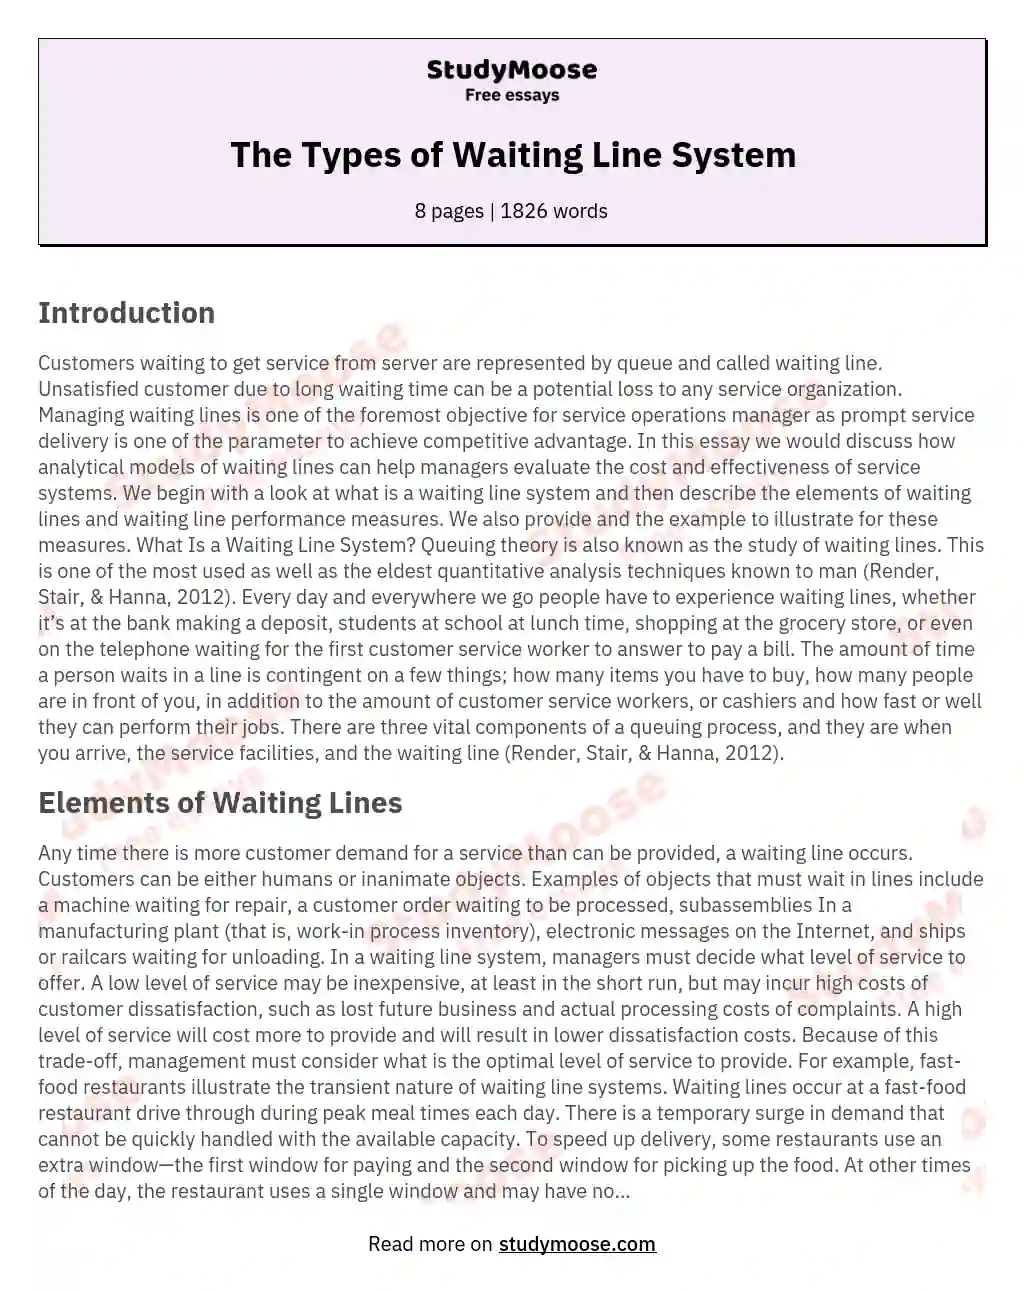 The Types of Waiting Line System essay